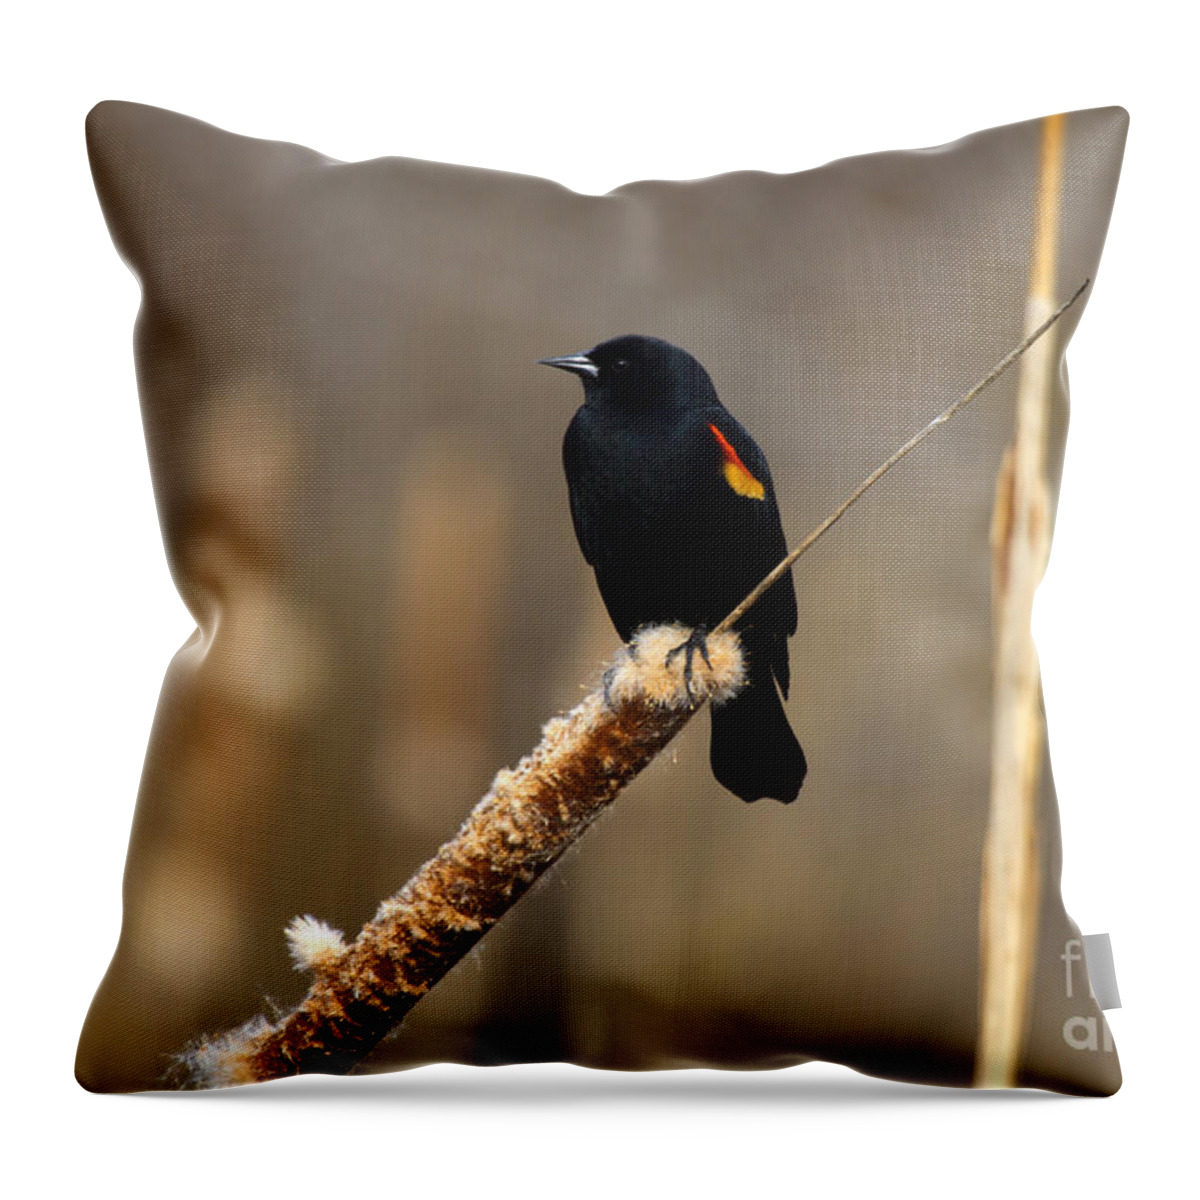 Blackbird Throw Pillow featuring the photograph At Rest by Michael Dawson